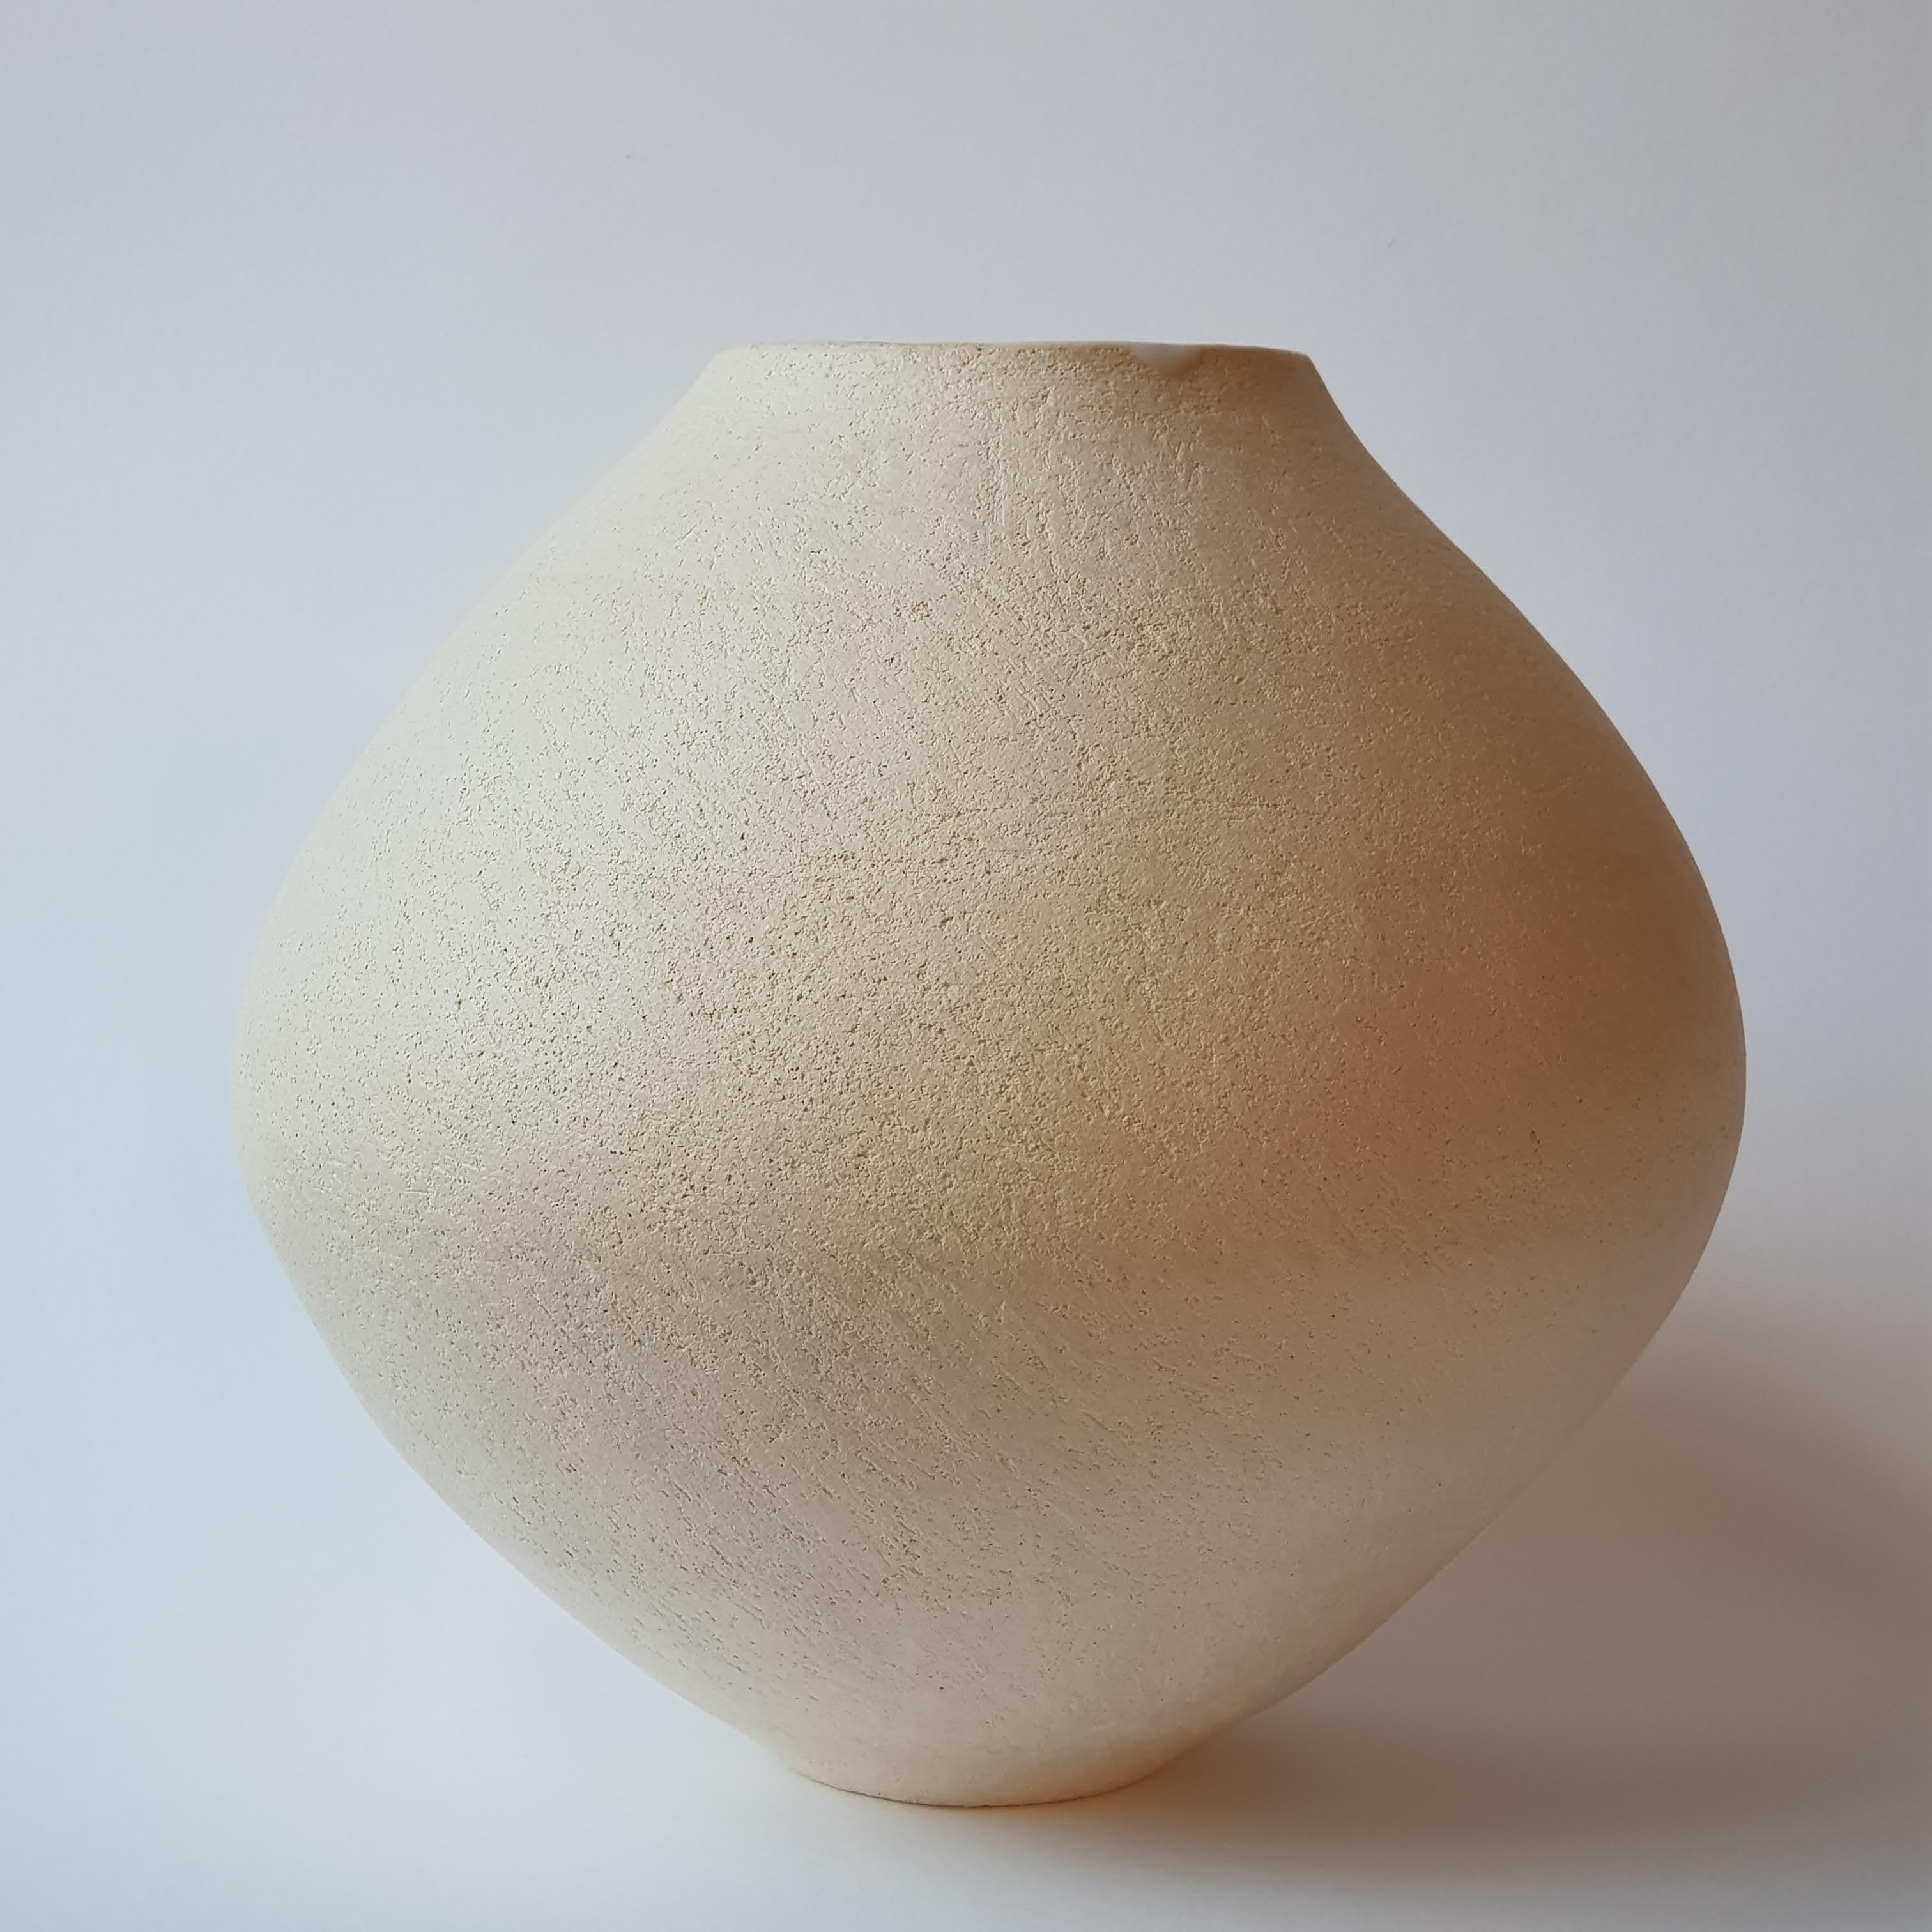 White Stoneware Sfondyli Vase by Elena Vasilantonaki
Unique
Dimensions: ⌀ 27 x H 23 cm (Dimensions may vary)
Materials: Stoneware
Available finishes: Black, White, Brown, Red, White Patina

Growing up in Greece I was surrounded by pottery forms that